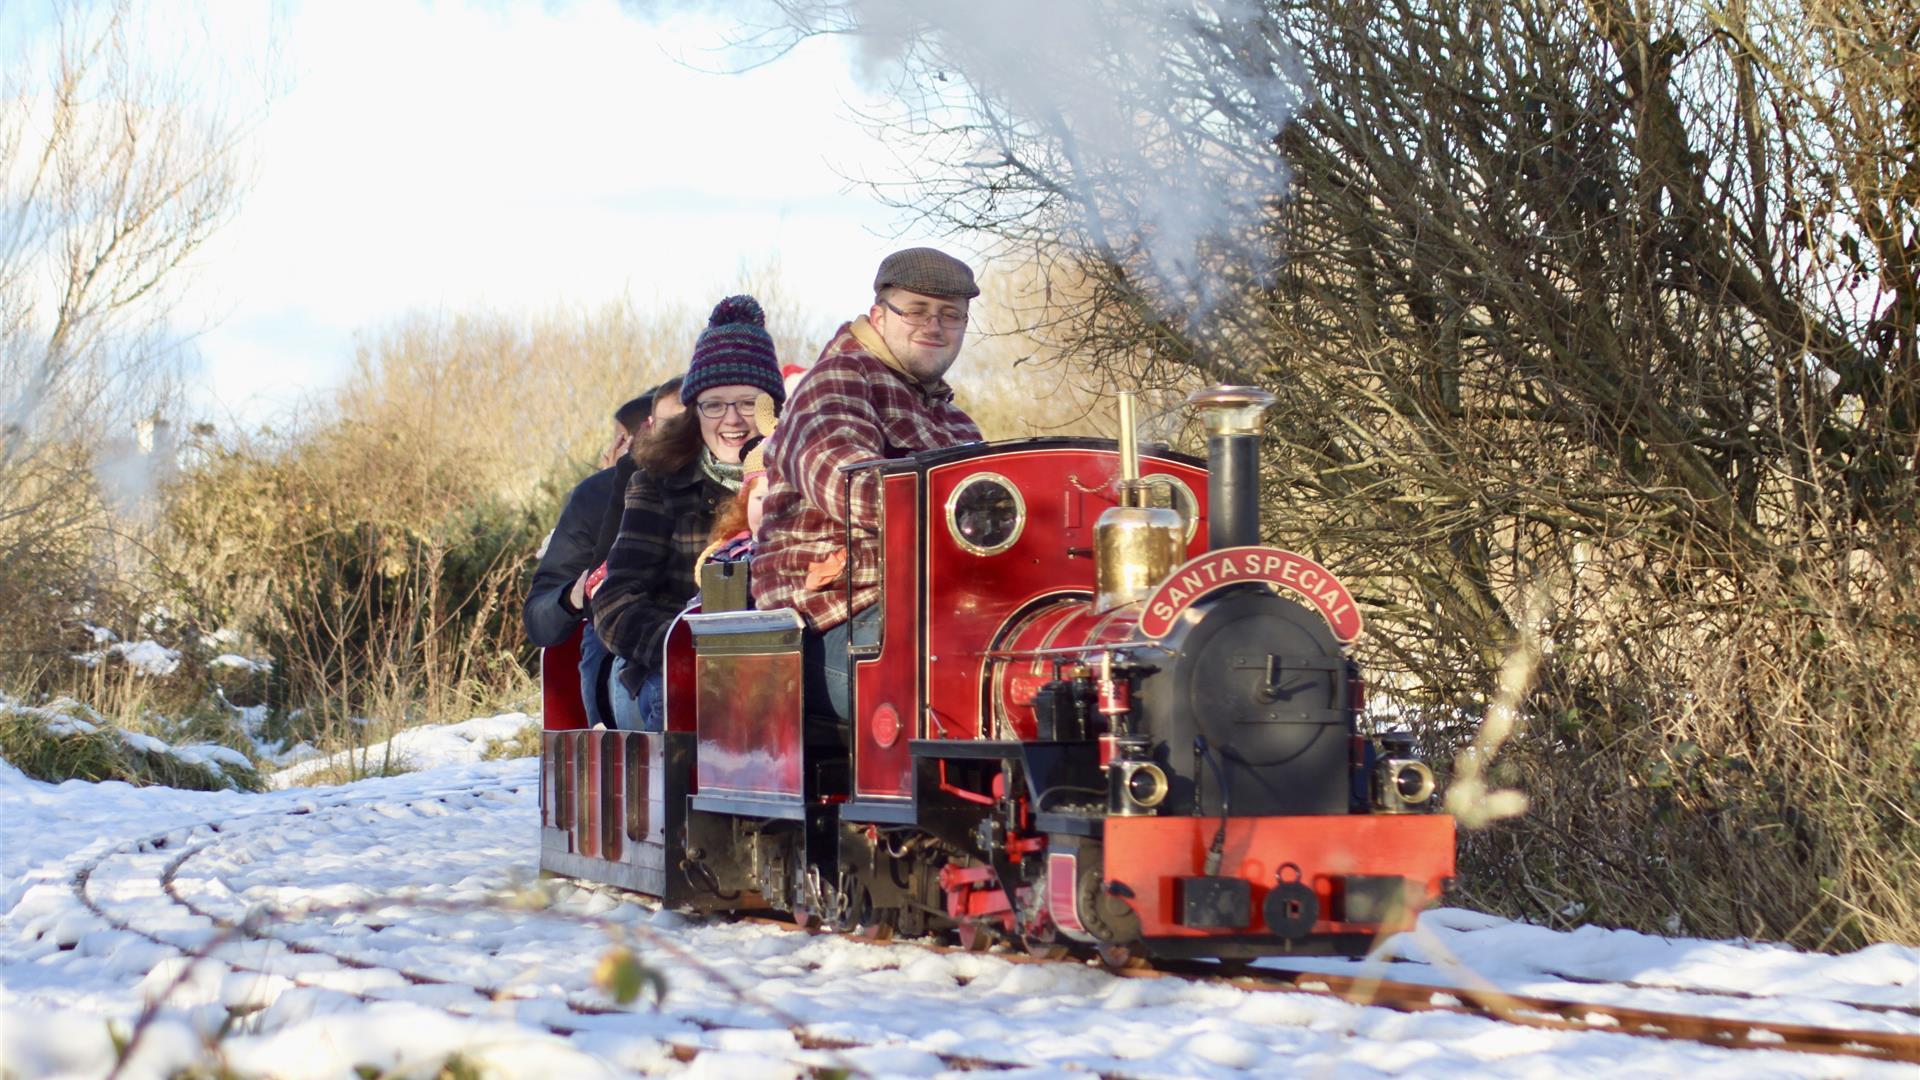 a photo of a group of adults on a small train surrounded by snow and trees